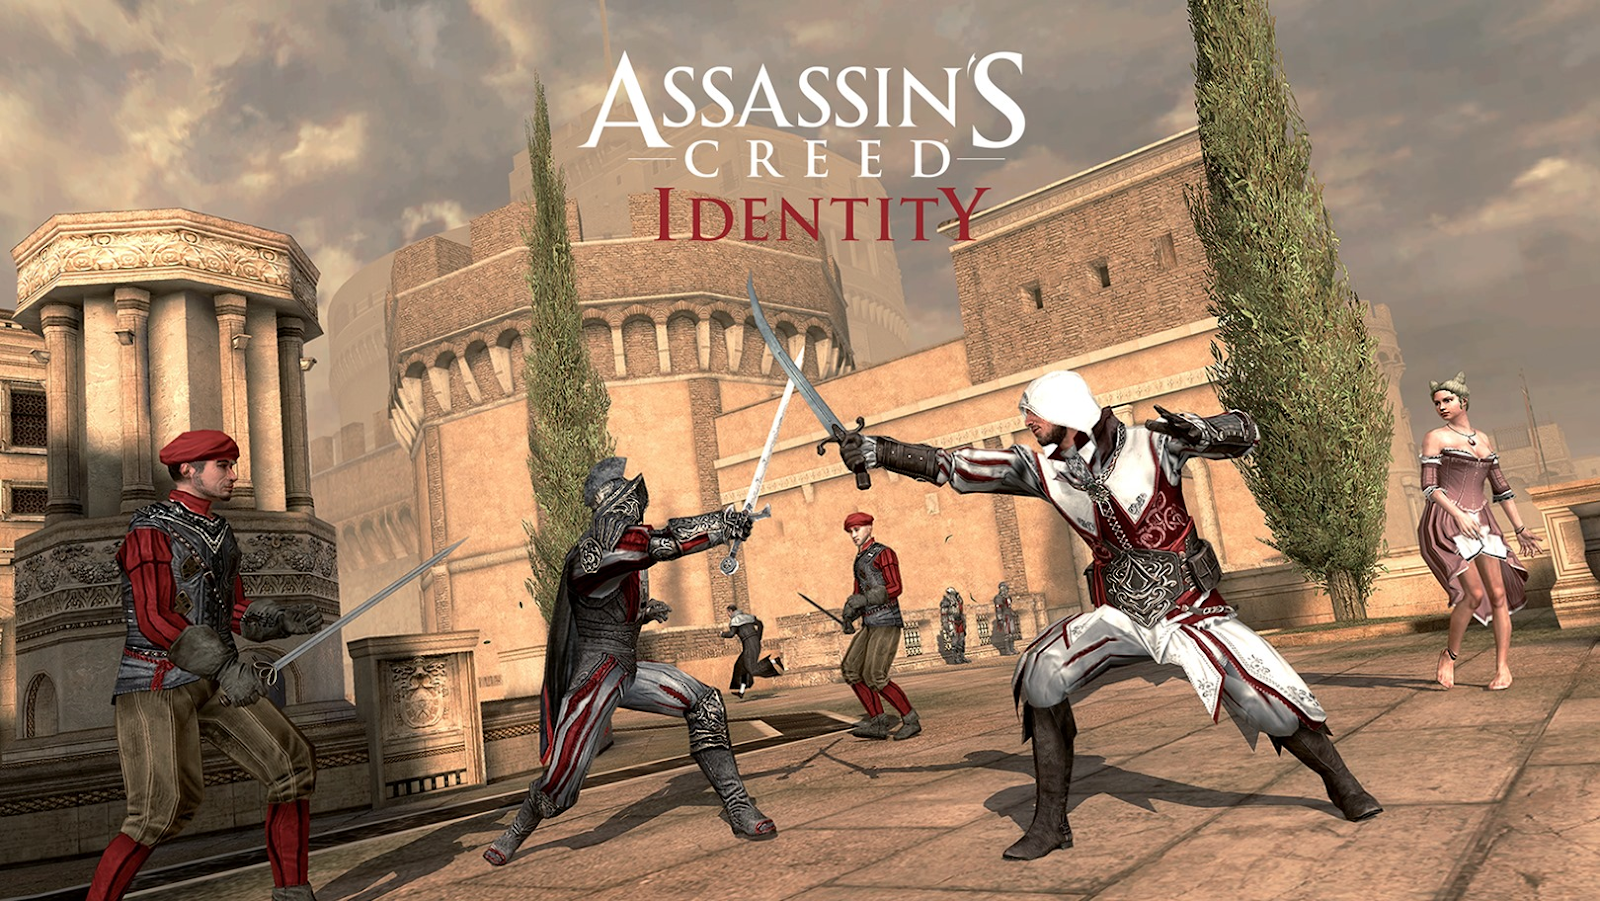 Download Assassin’s Creed Mobile miễn phí